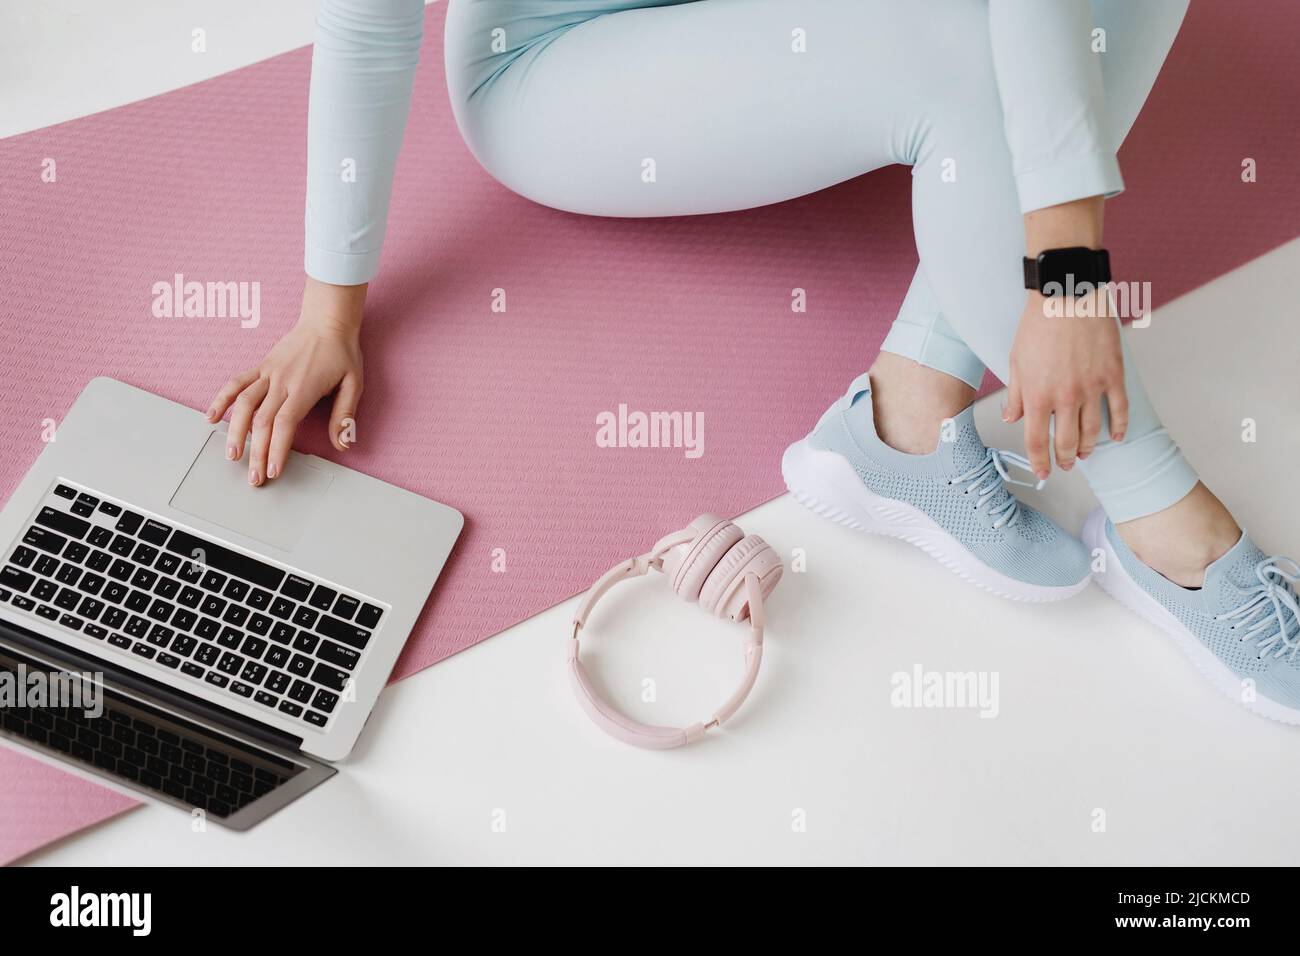 Top view of unrecognizable woman sitting on mat and using laptop. Stock Photo